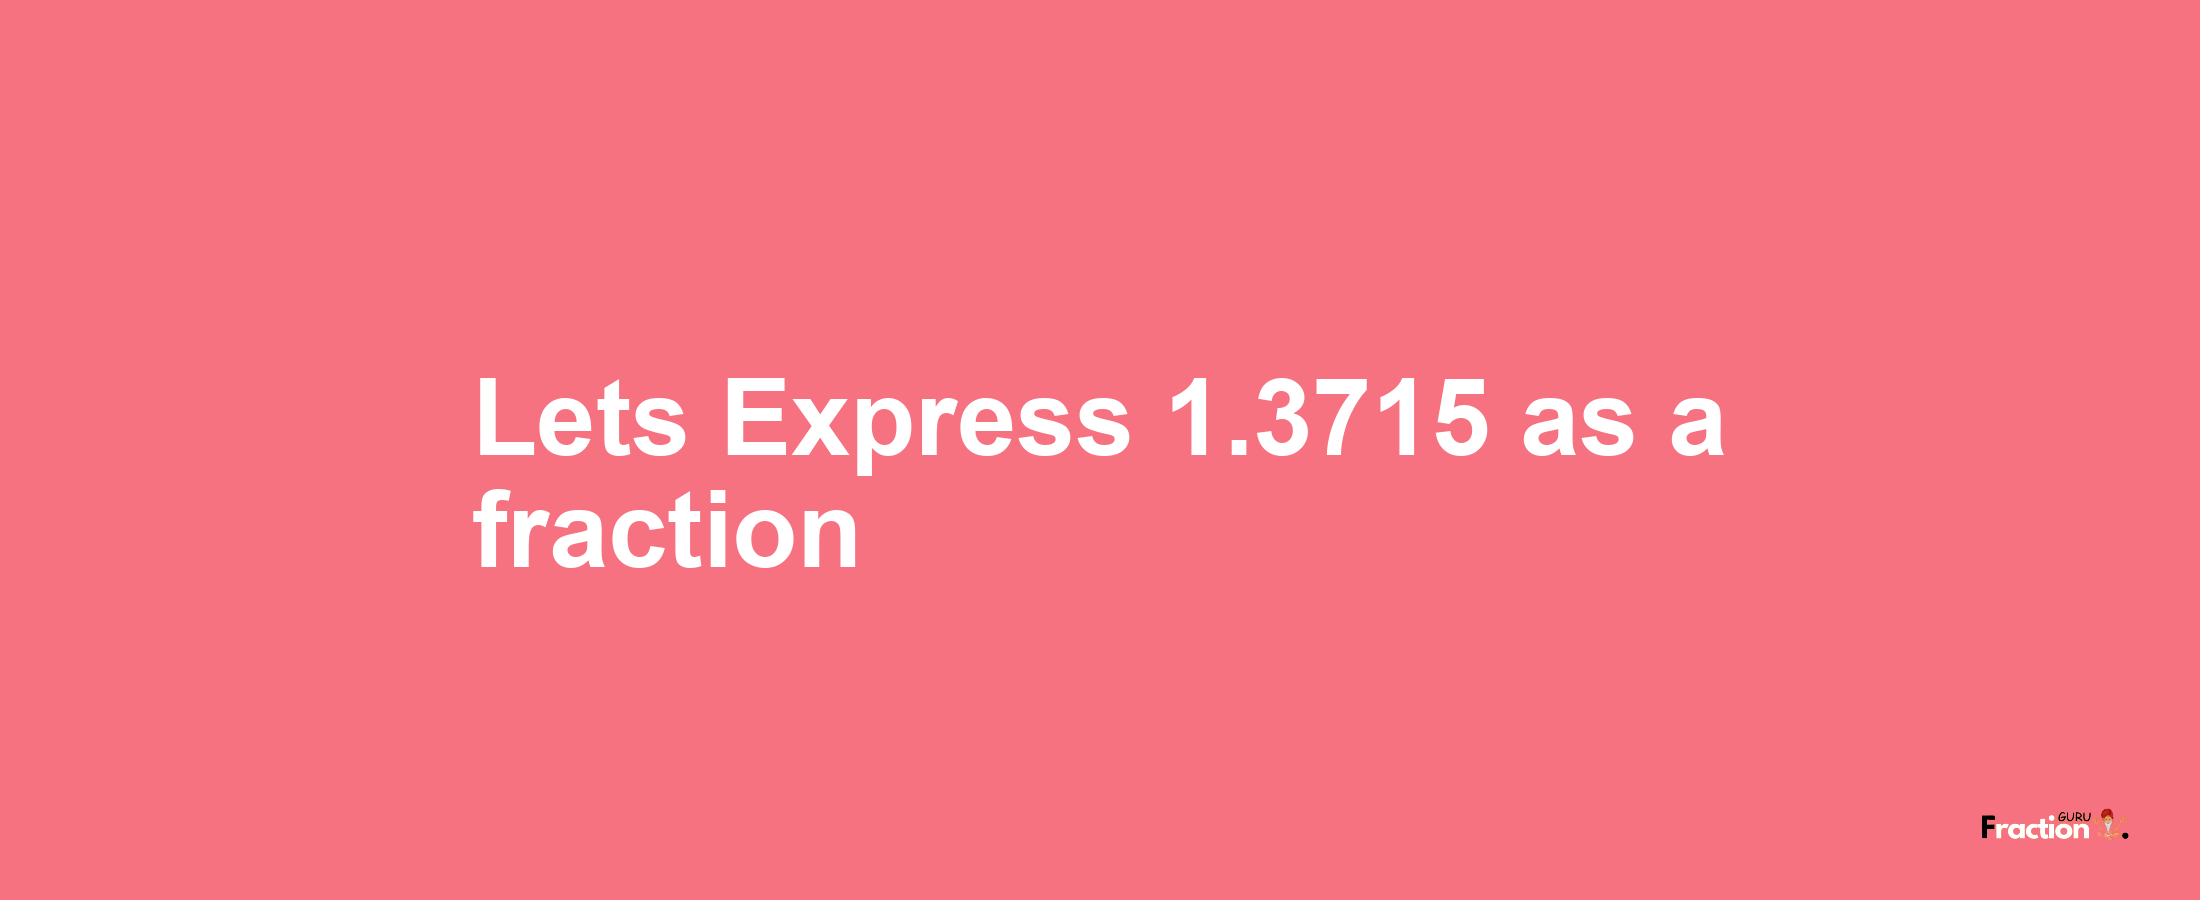 Lets Express 1.3715 as afraction